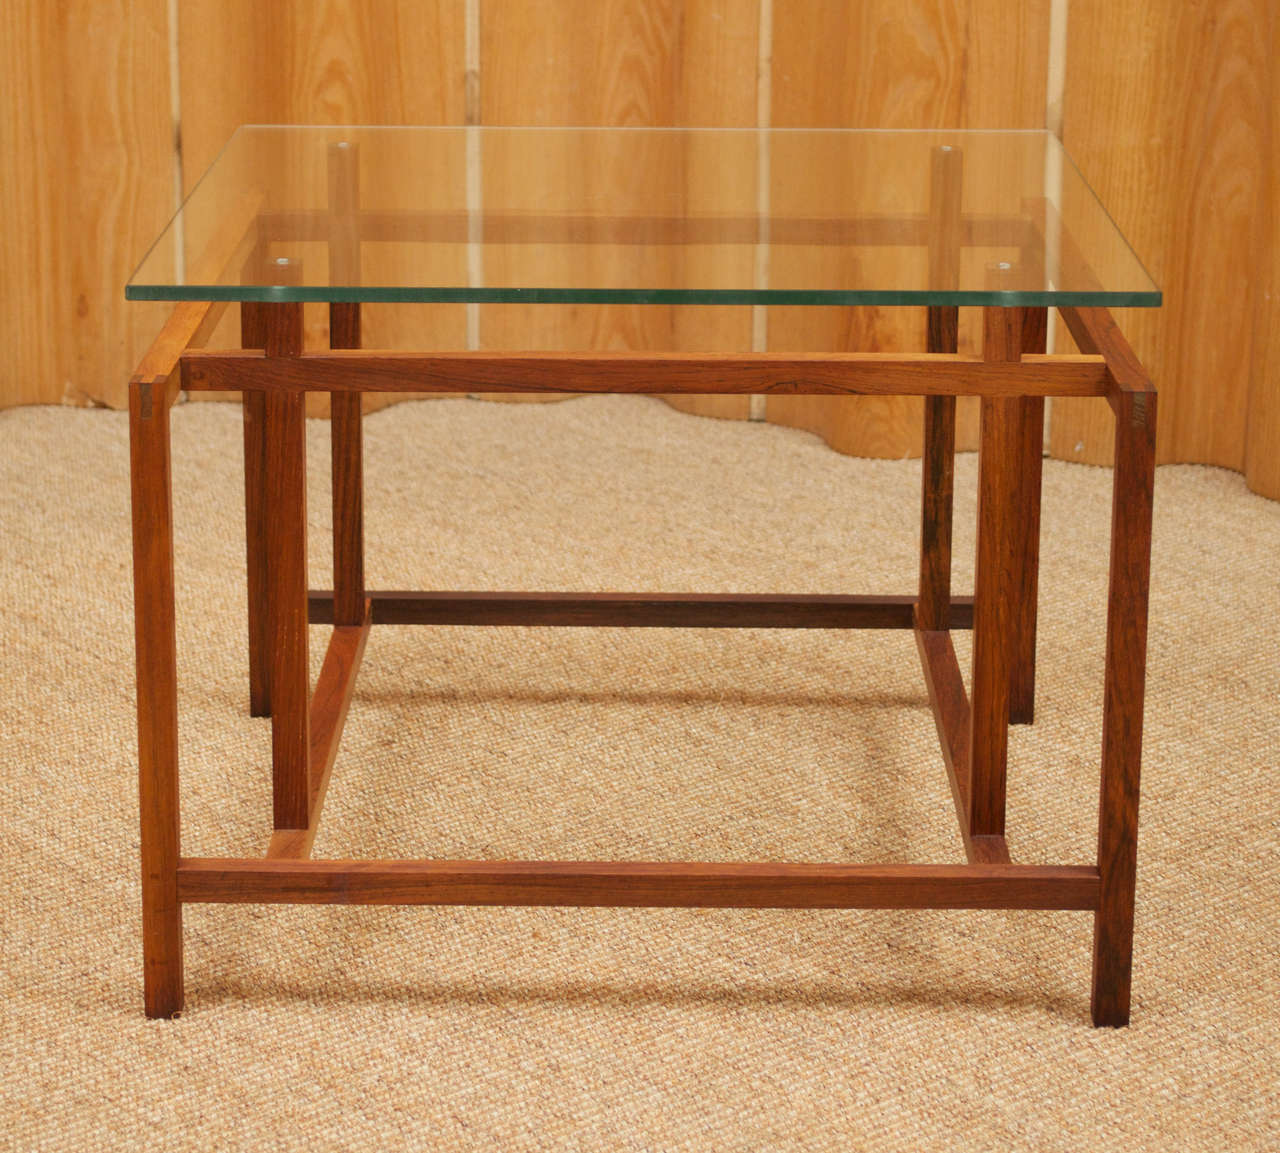 Pair of rosewood and glass side tables designed by Henning Norgaard for Komfort.